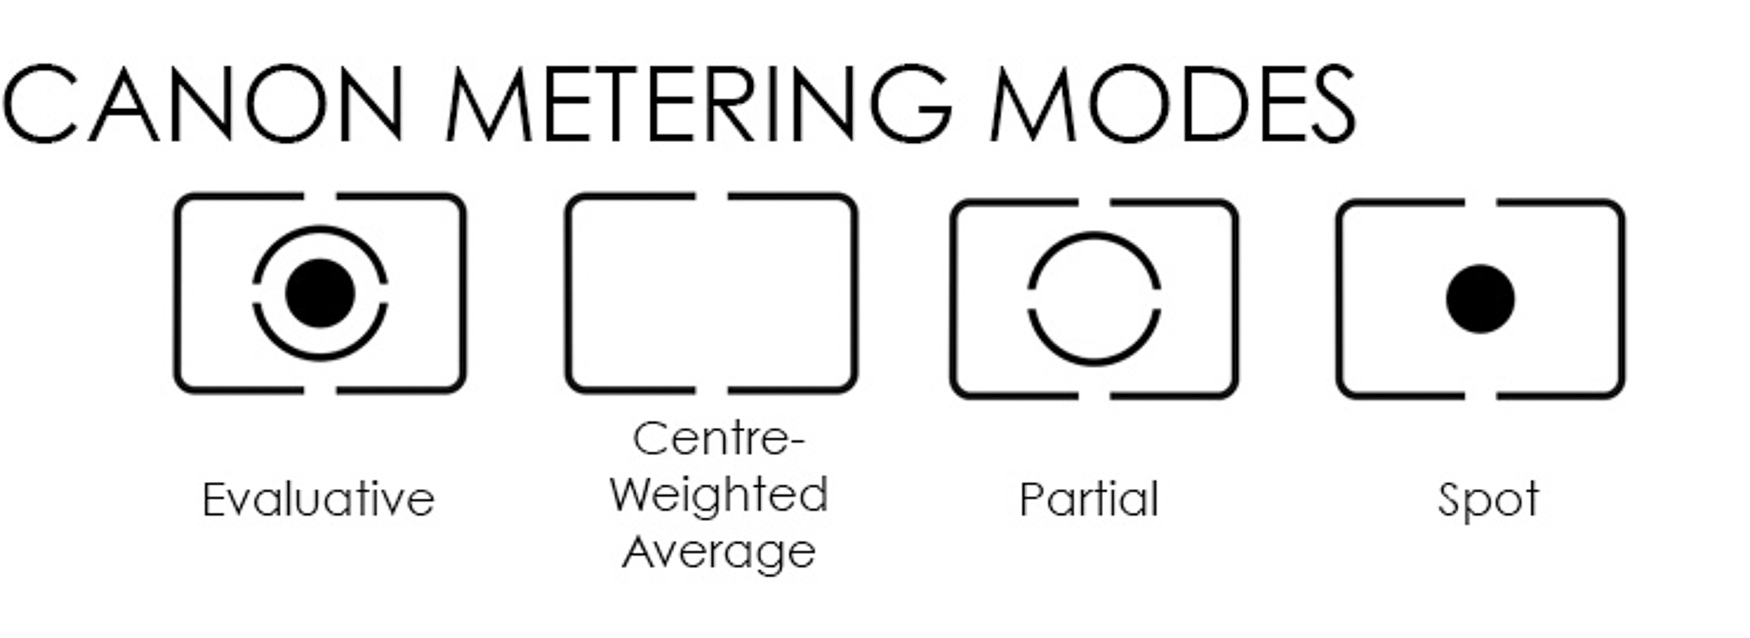 Using Metering Modes in Wildlife Photography